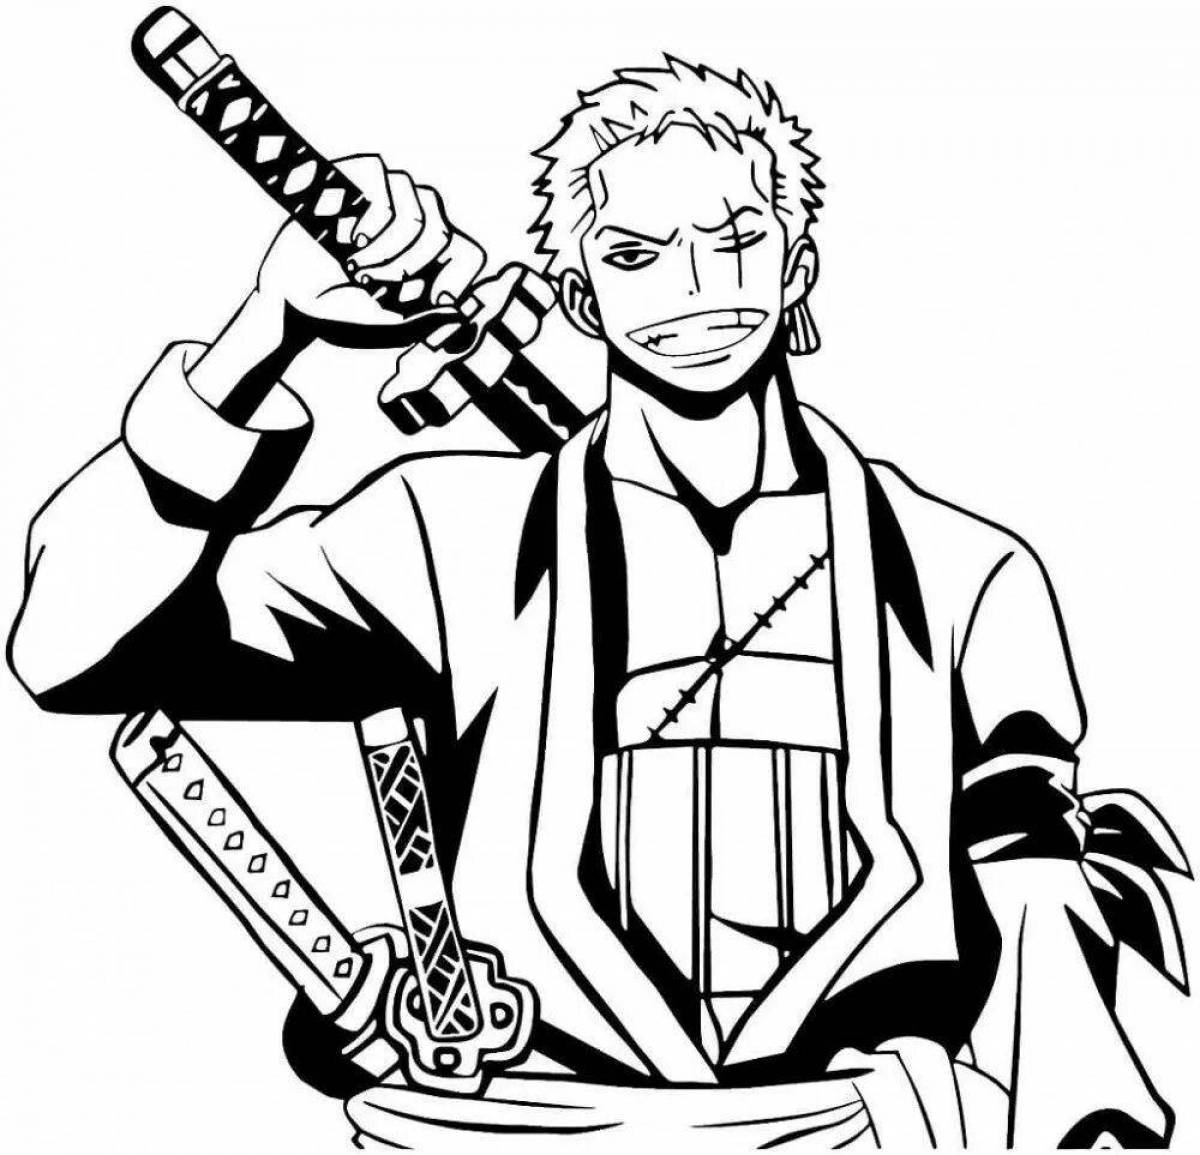 Sweet Zoro coloring page